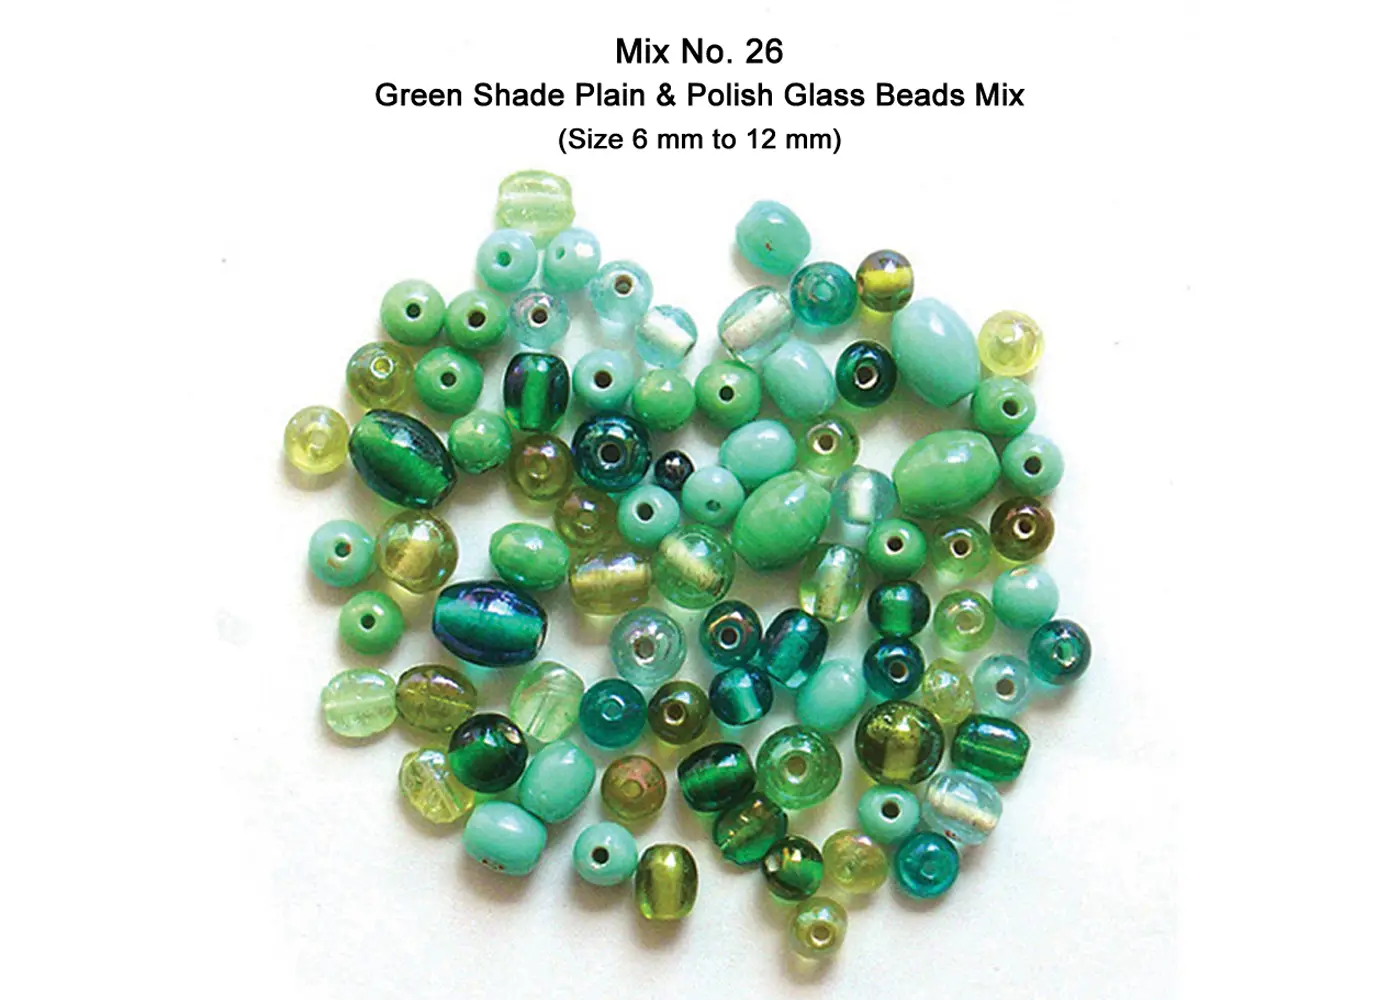 Green Color Plain with Polish Glass Beads Mix (Size 6 mm to 12 mm)